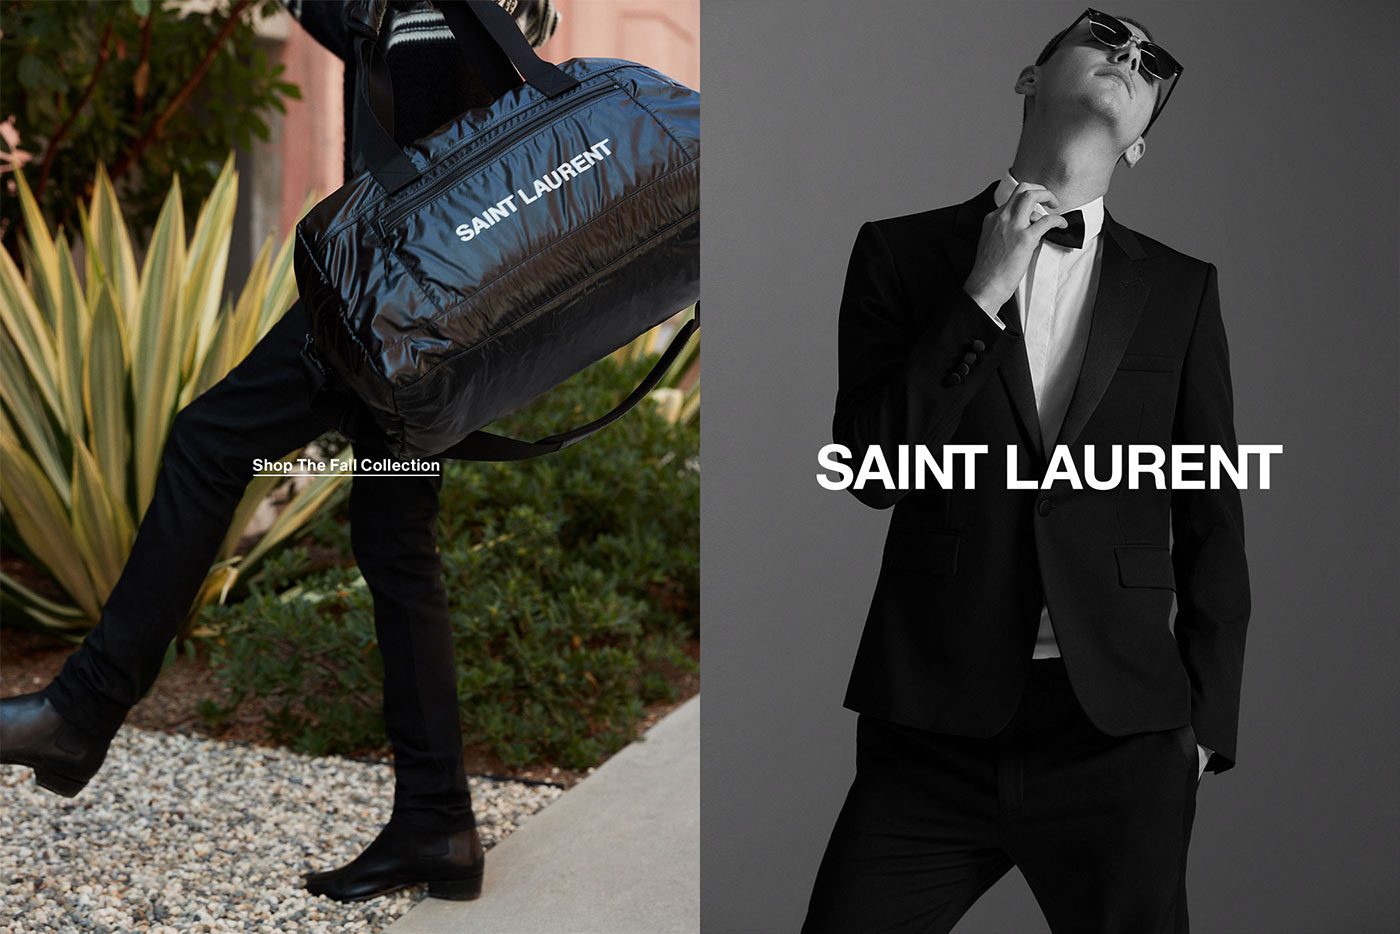 HED: SAINT LAURENT (LOGO) CTA: SHOP THE FALL COLLECTION